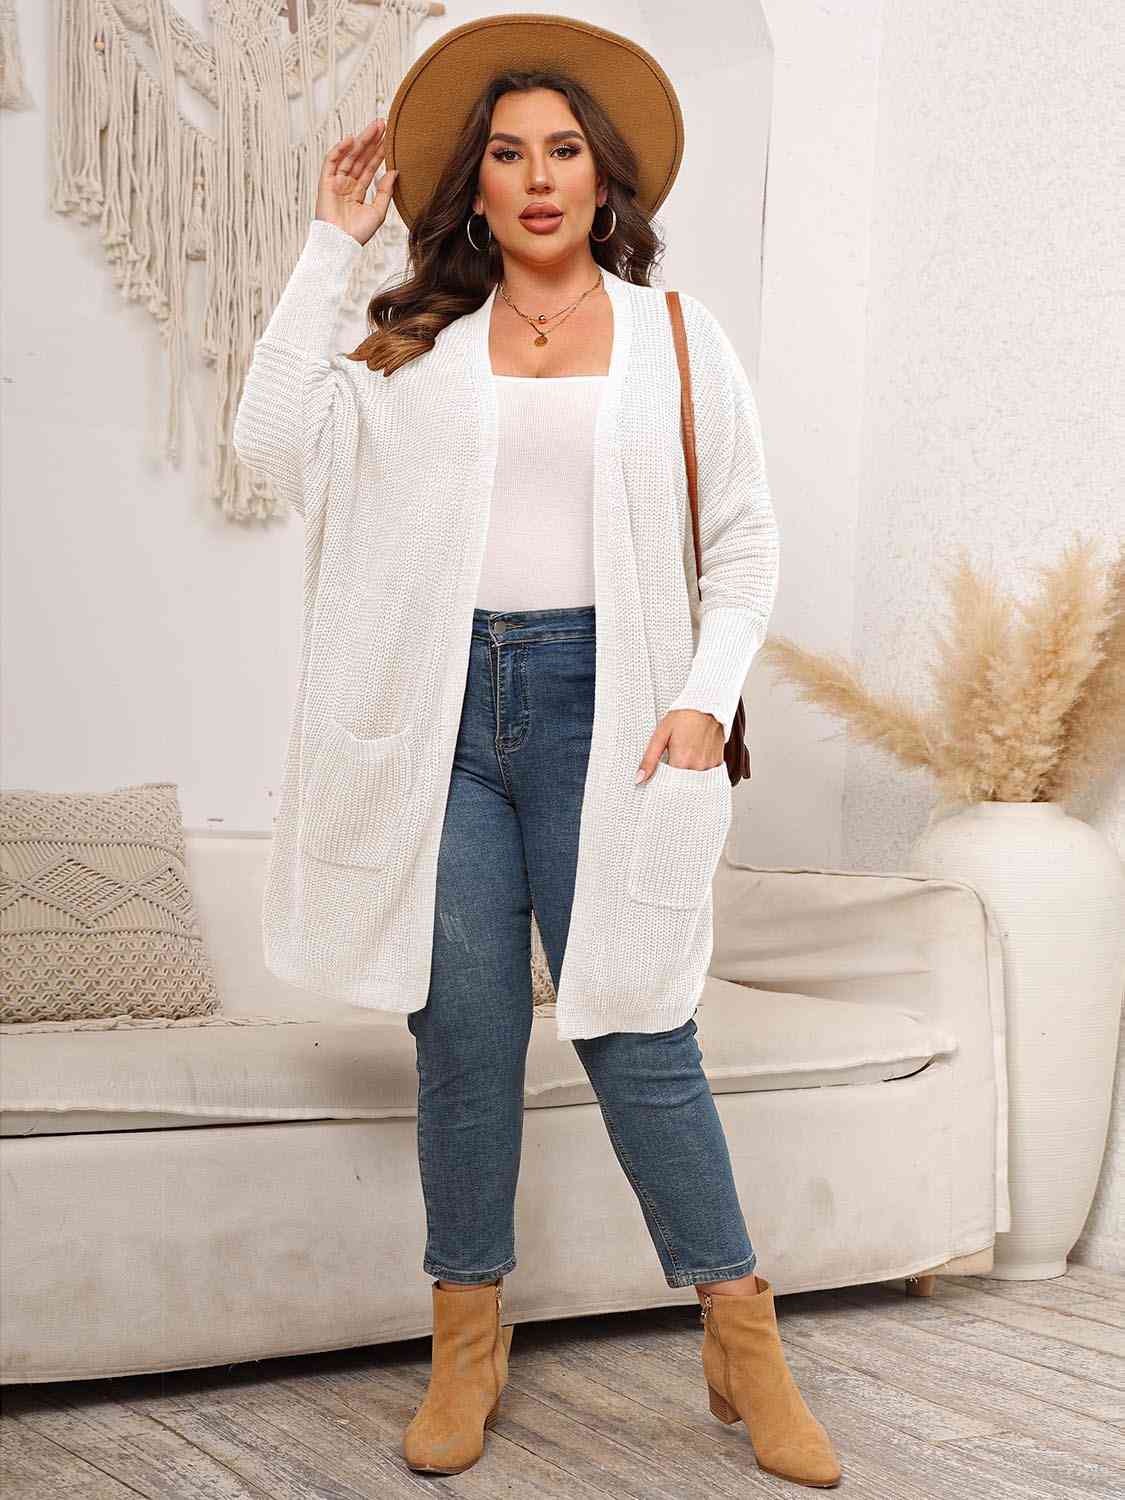 Plus Size Open Front Cardigan With Pockets